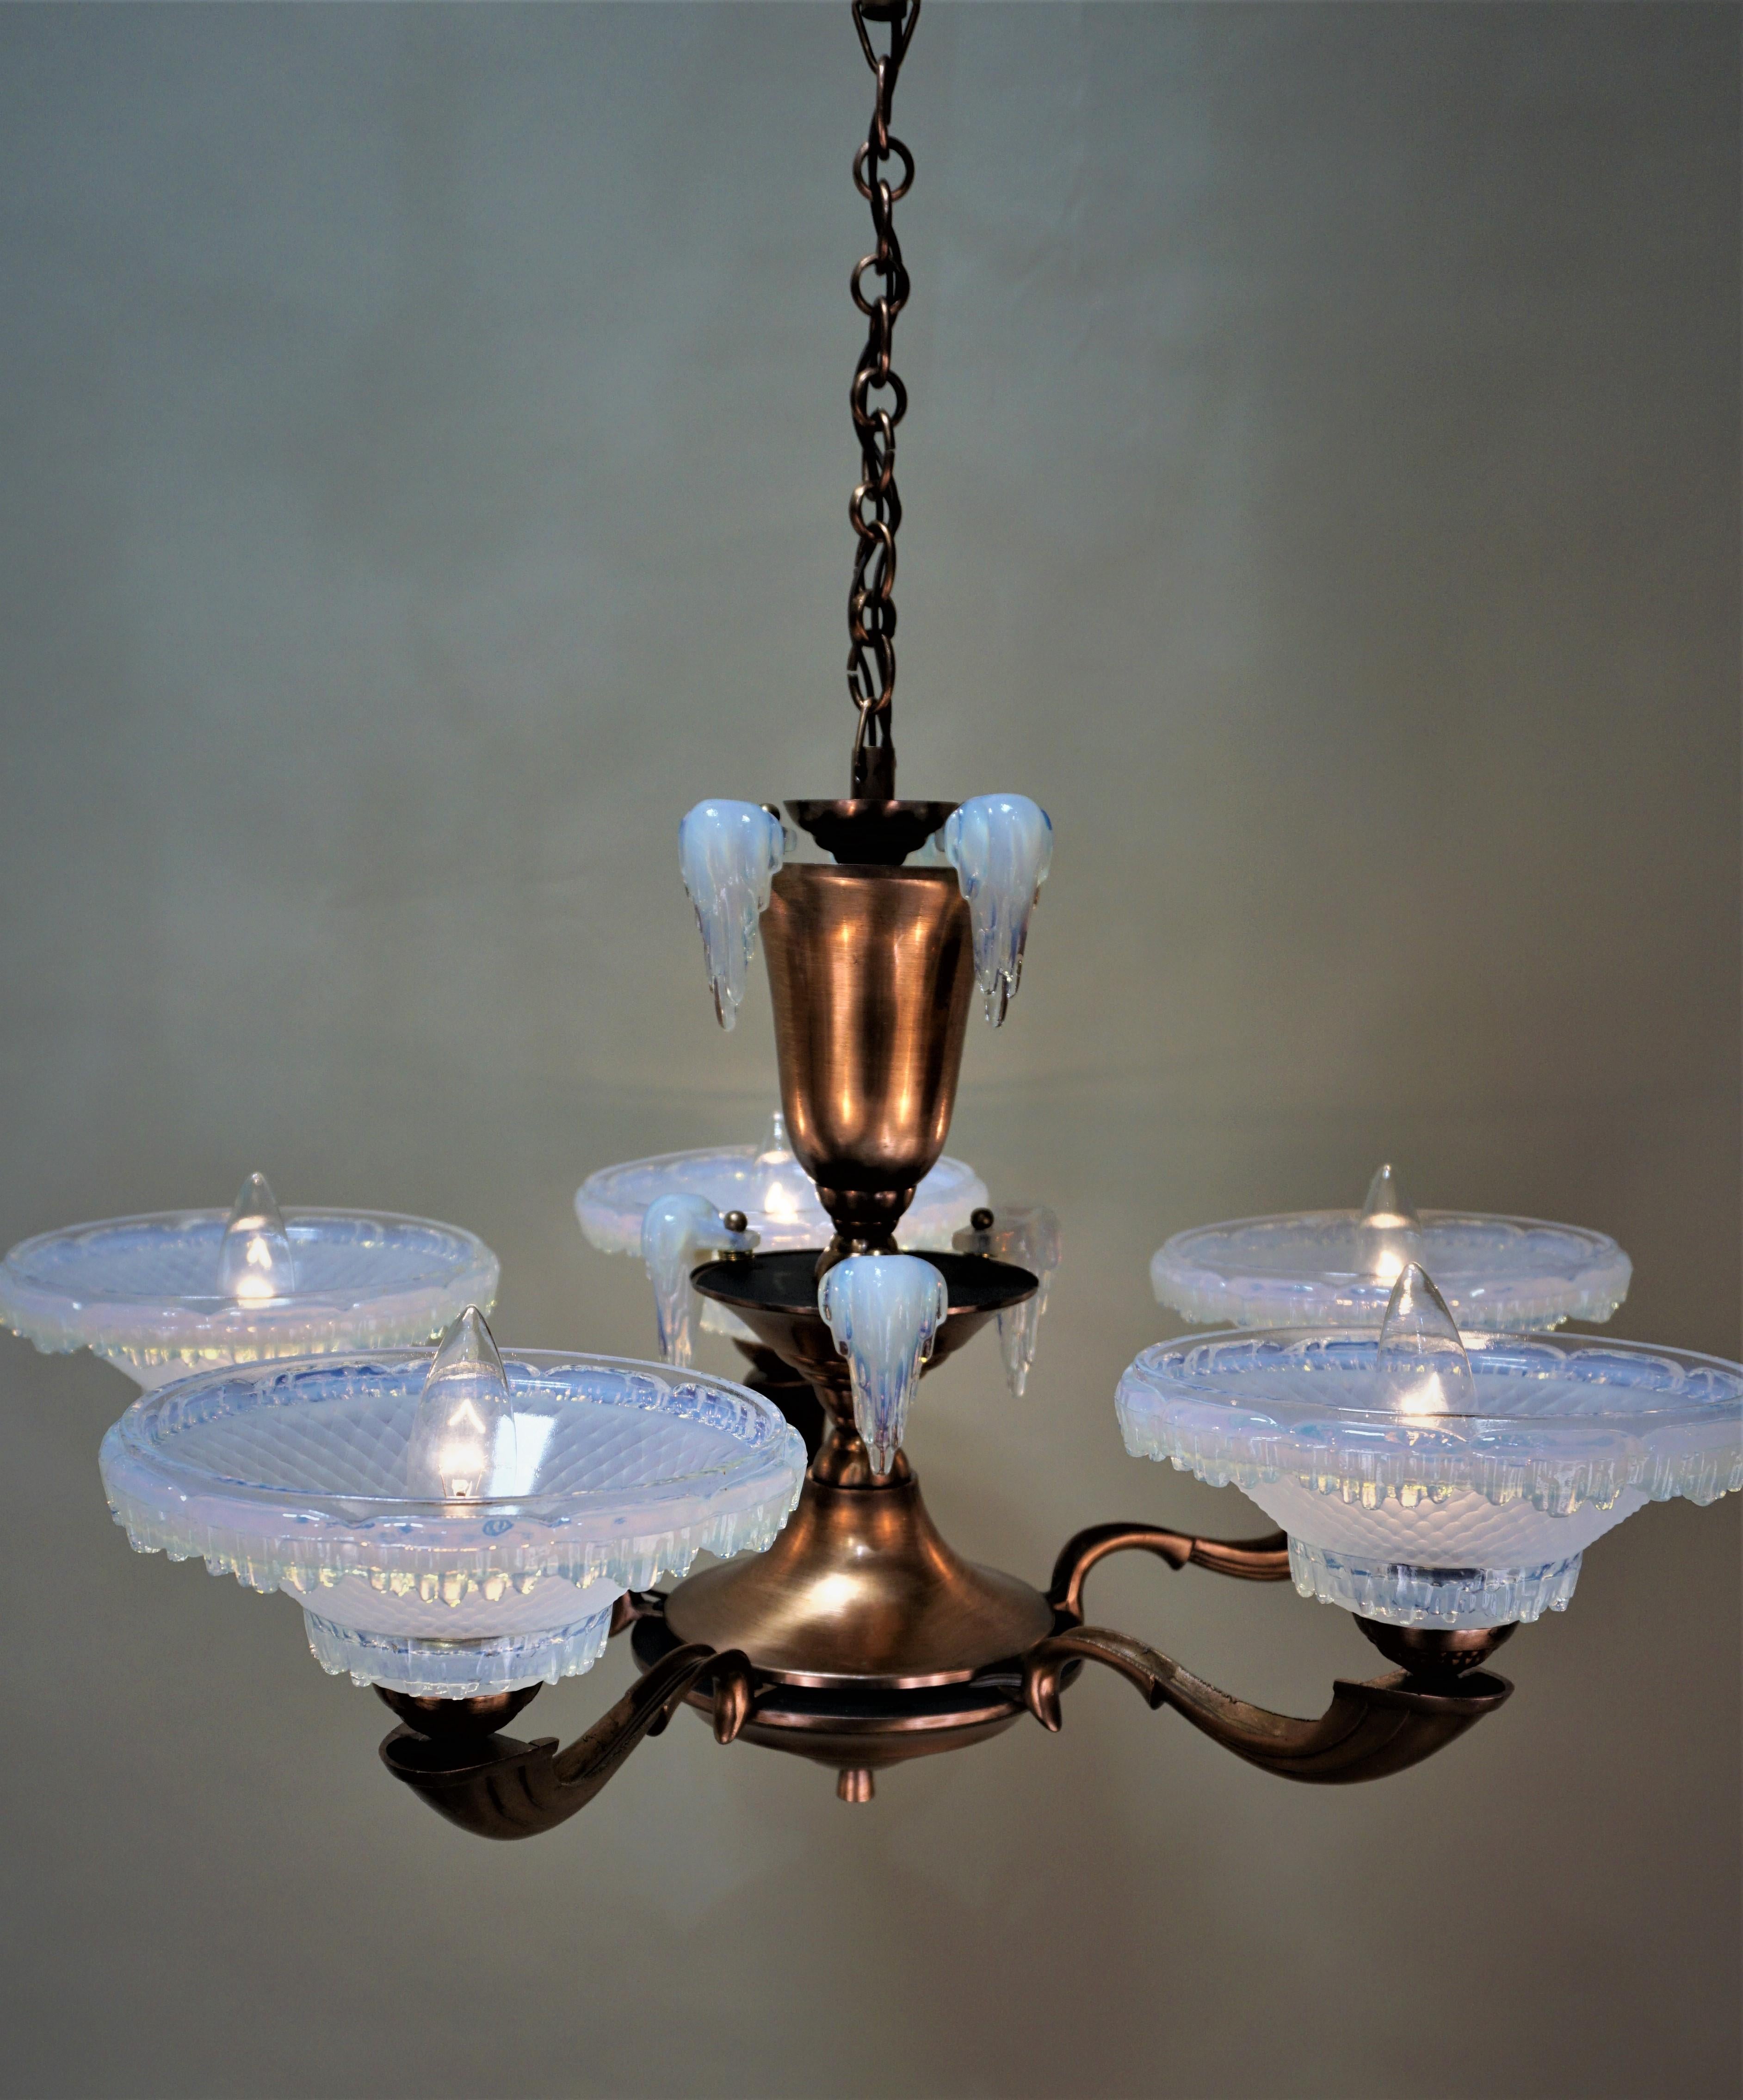 Plated 1930s French Art Deco Opalescent Glass Chandelier by Ezan